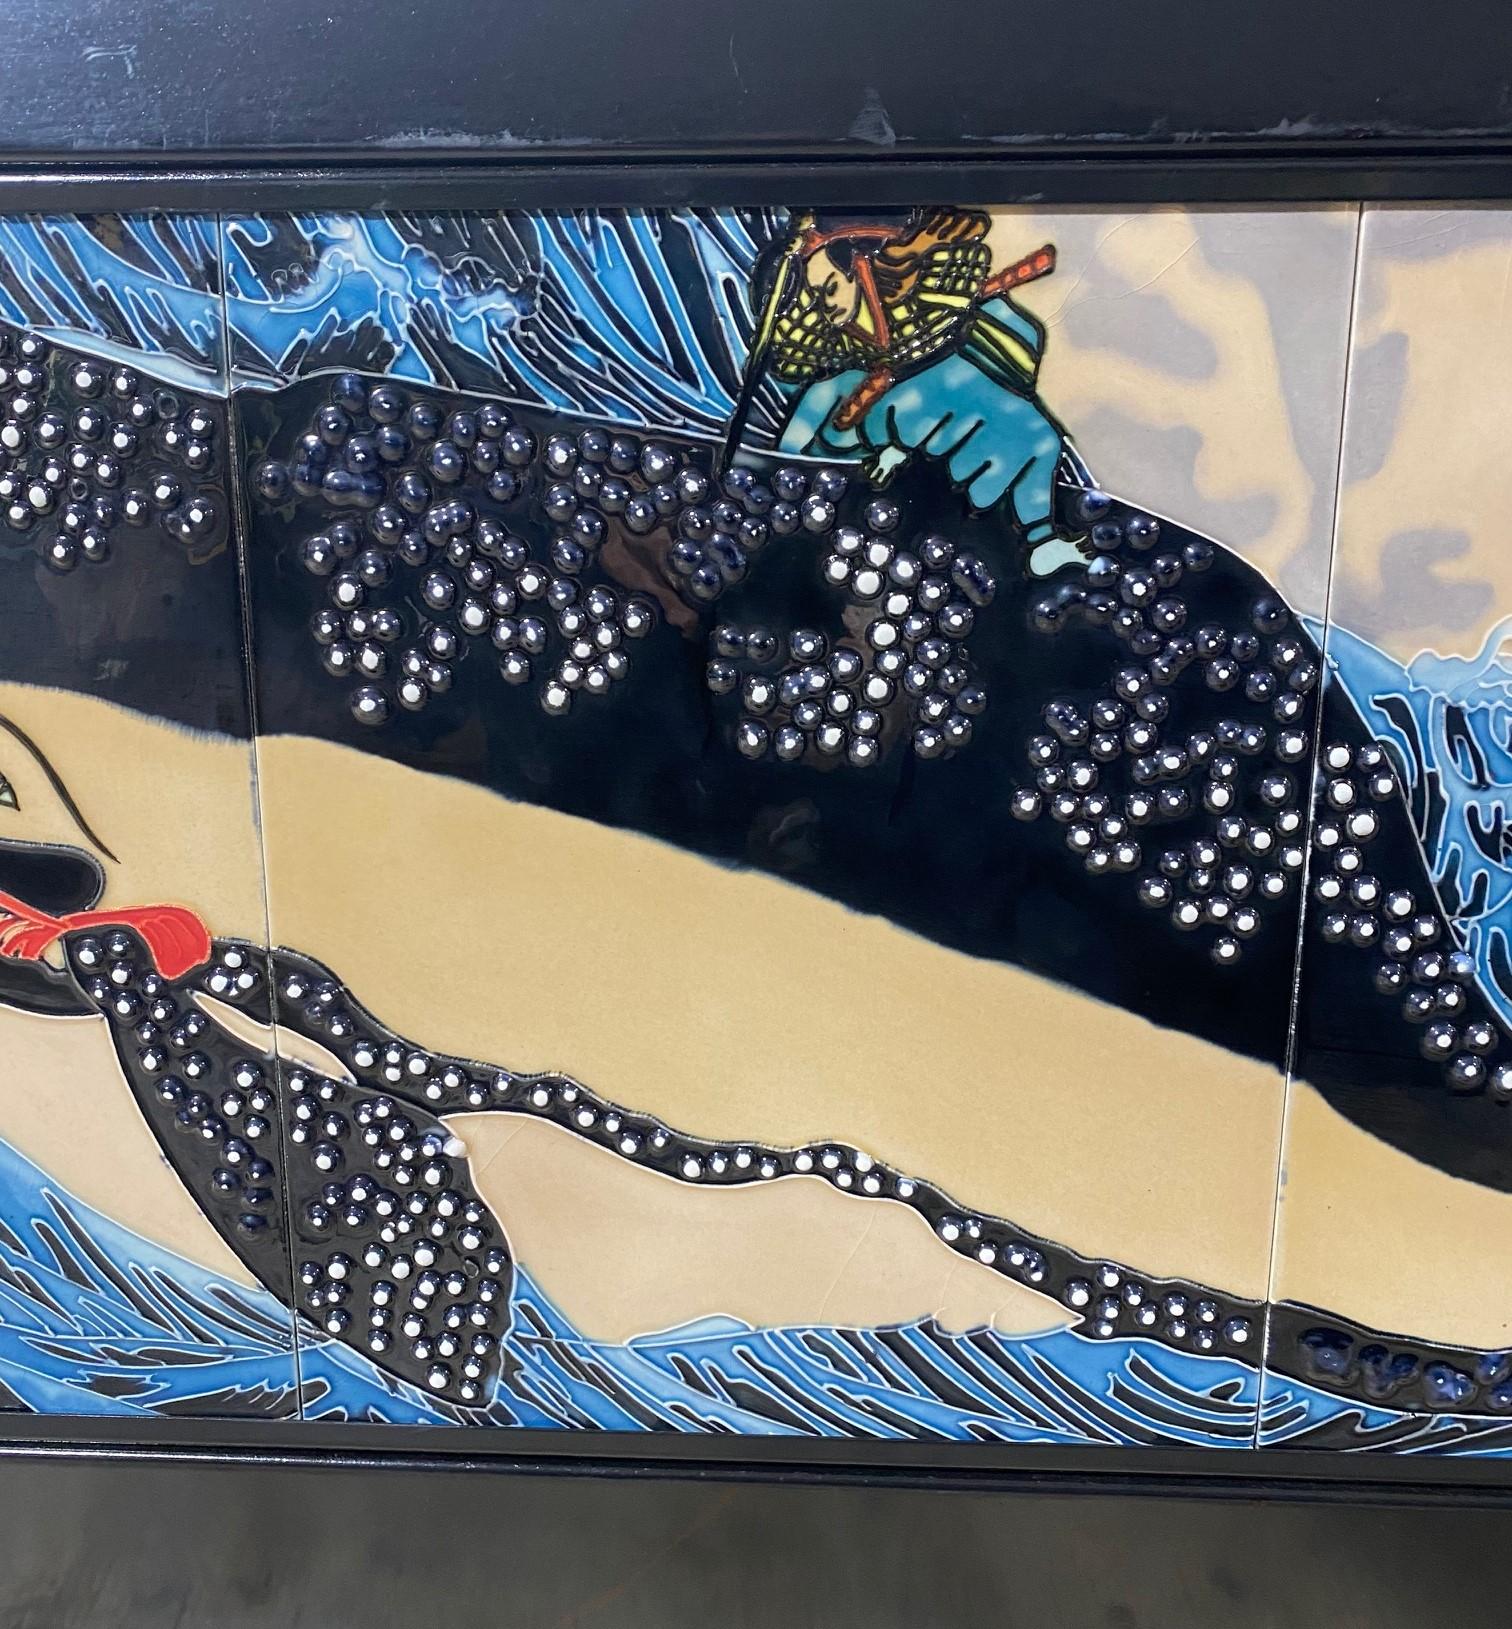 Japanese Asian Ceramic Wall Plaque Painting Utagawa Kuniyoshi Subduing Whale  In Good Condition For Sale In Studio City, CA